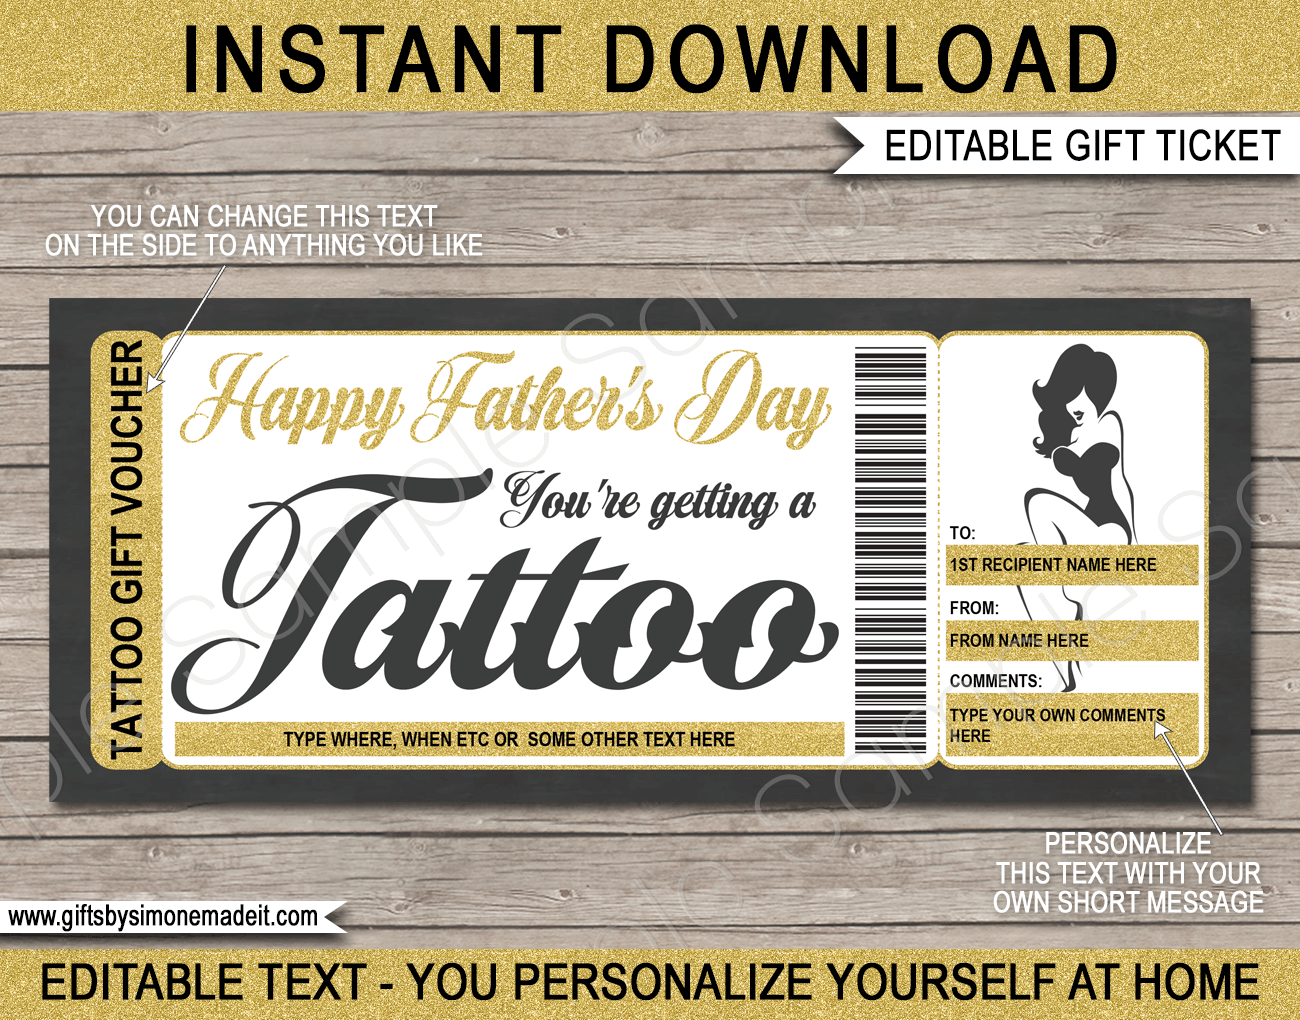 Tattoo Ticket Gift Certificate Personalised Coupon (Instant